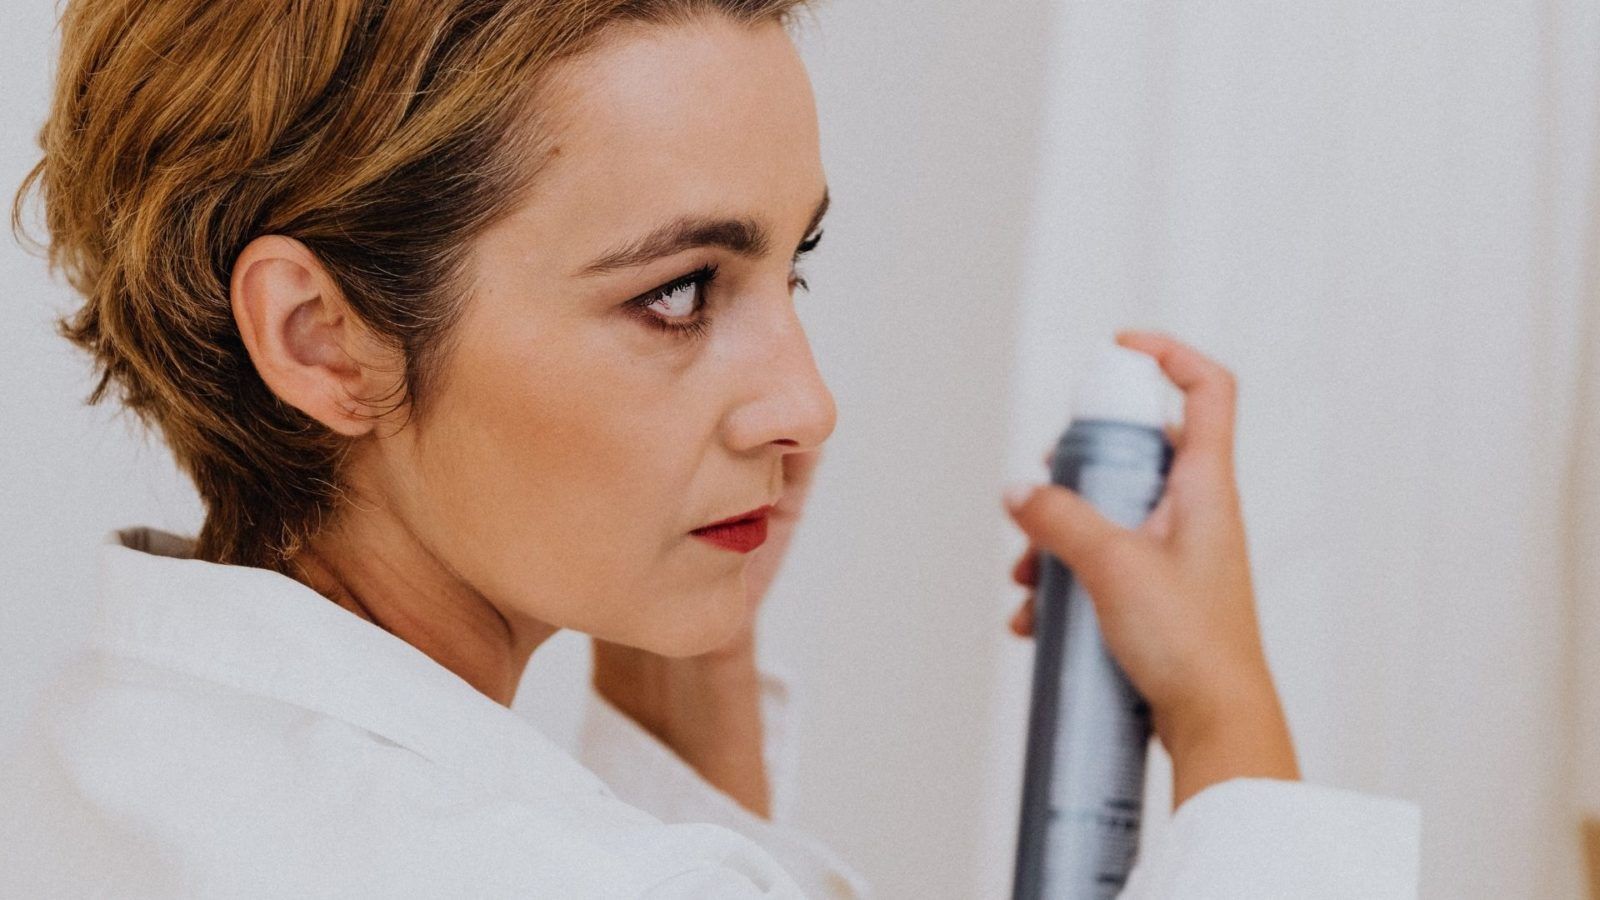 13 hair sprays to invest in for effortless hair styling at home